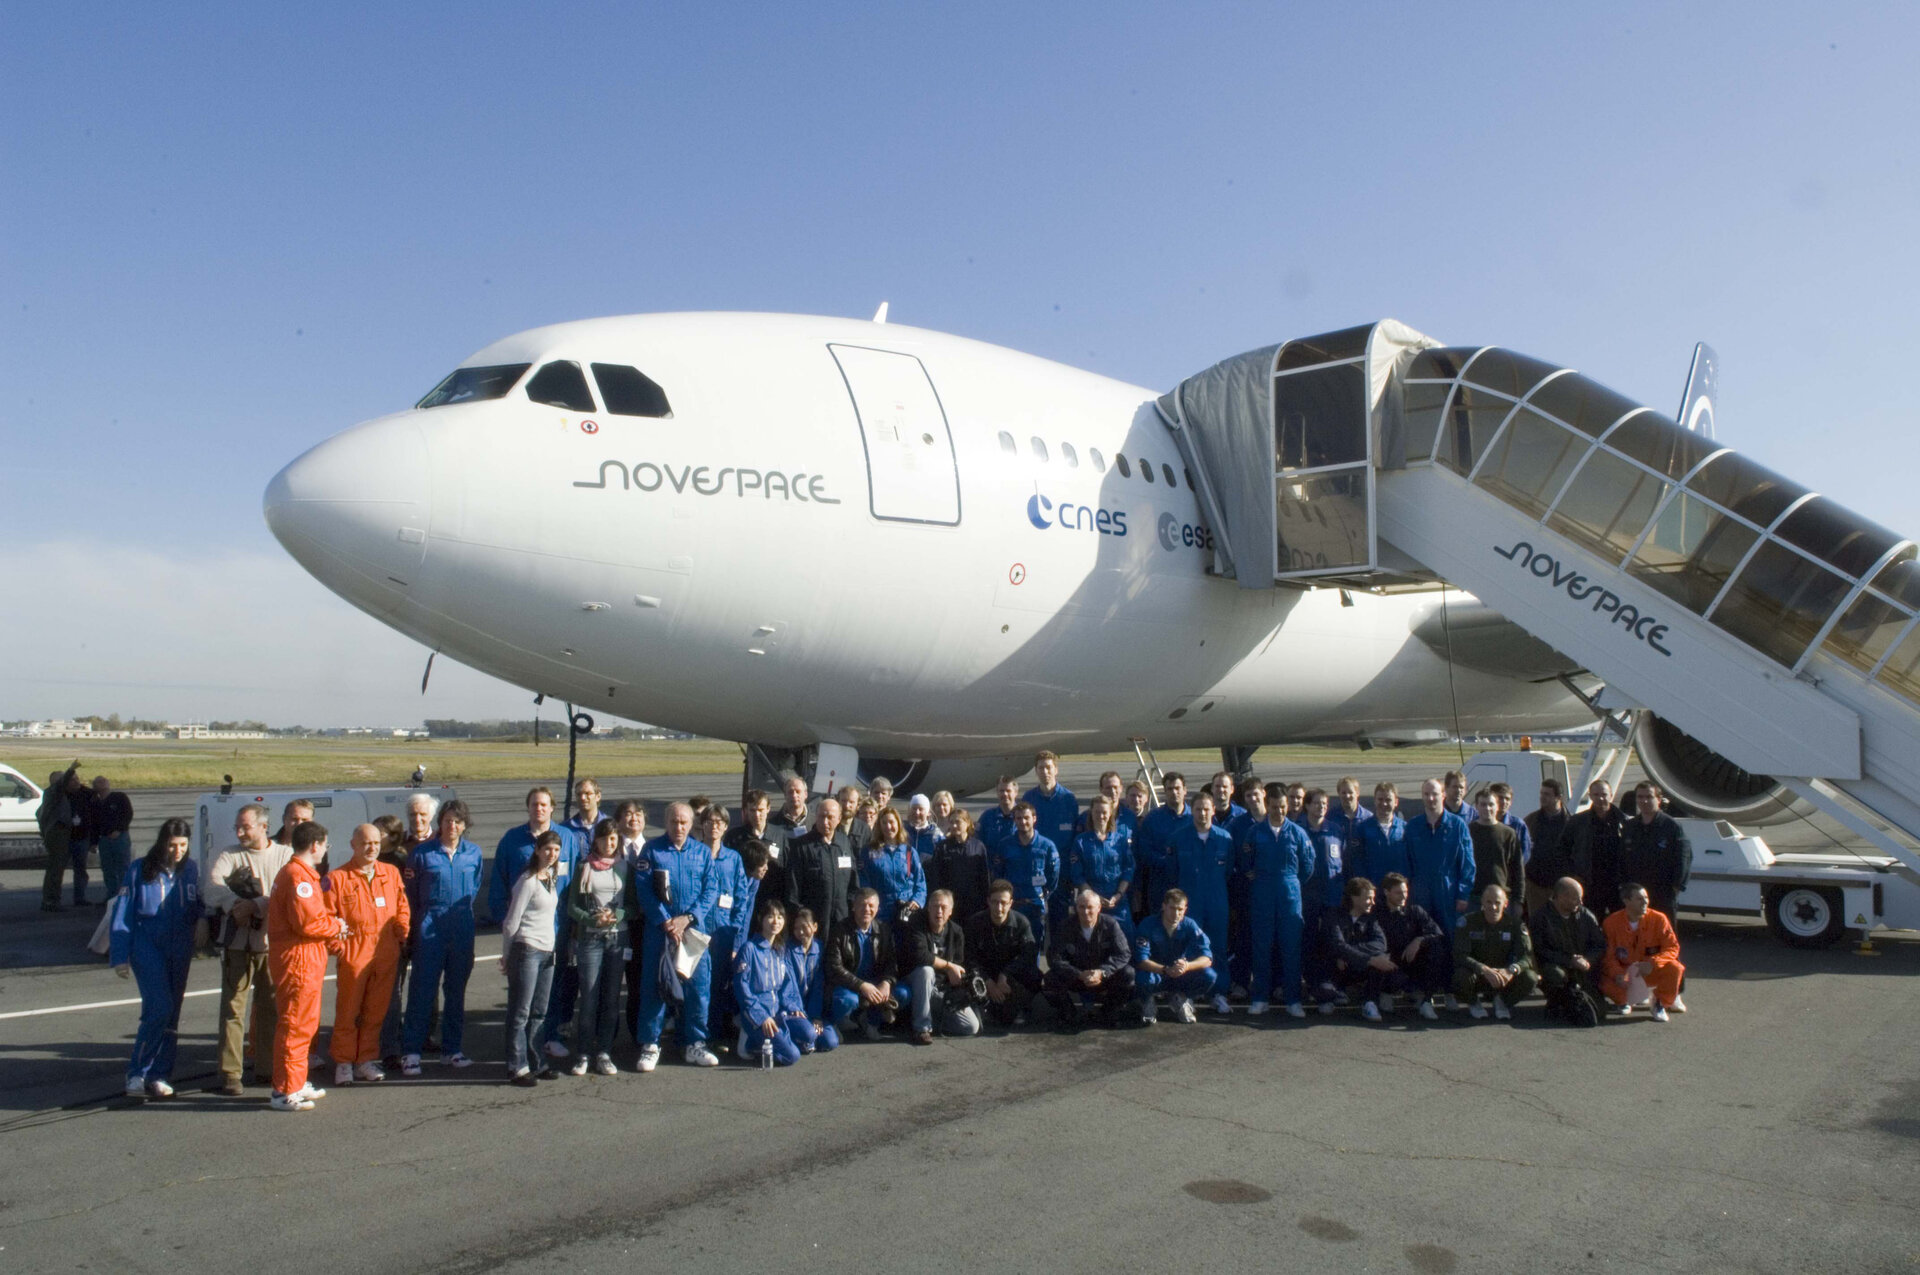 'Zero-G' returns to Bordeaux-Mérignac airport at the end of the first flight day